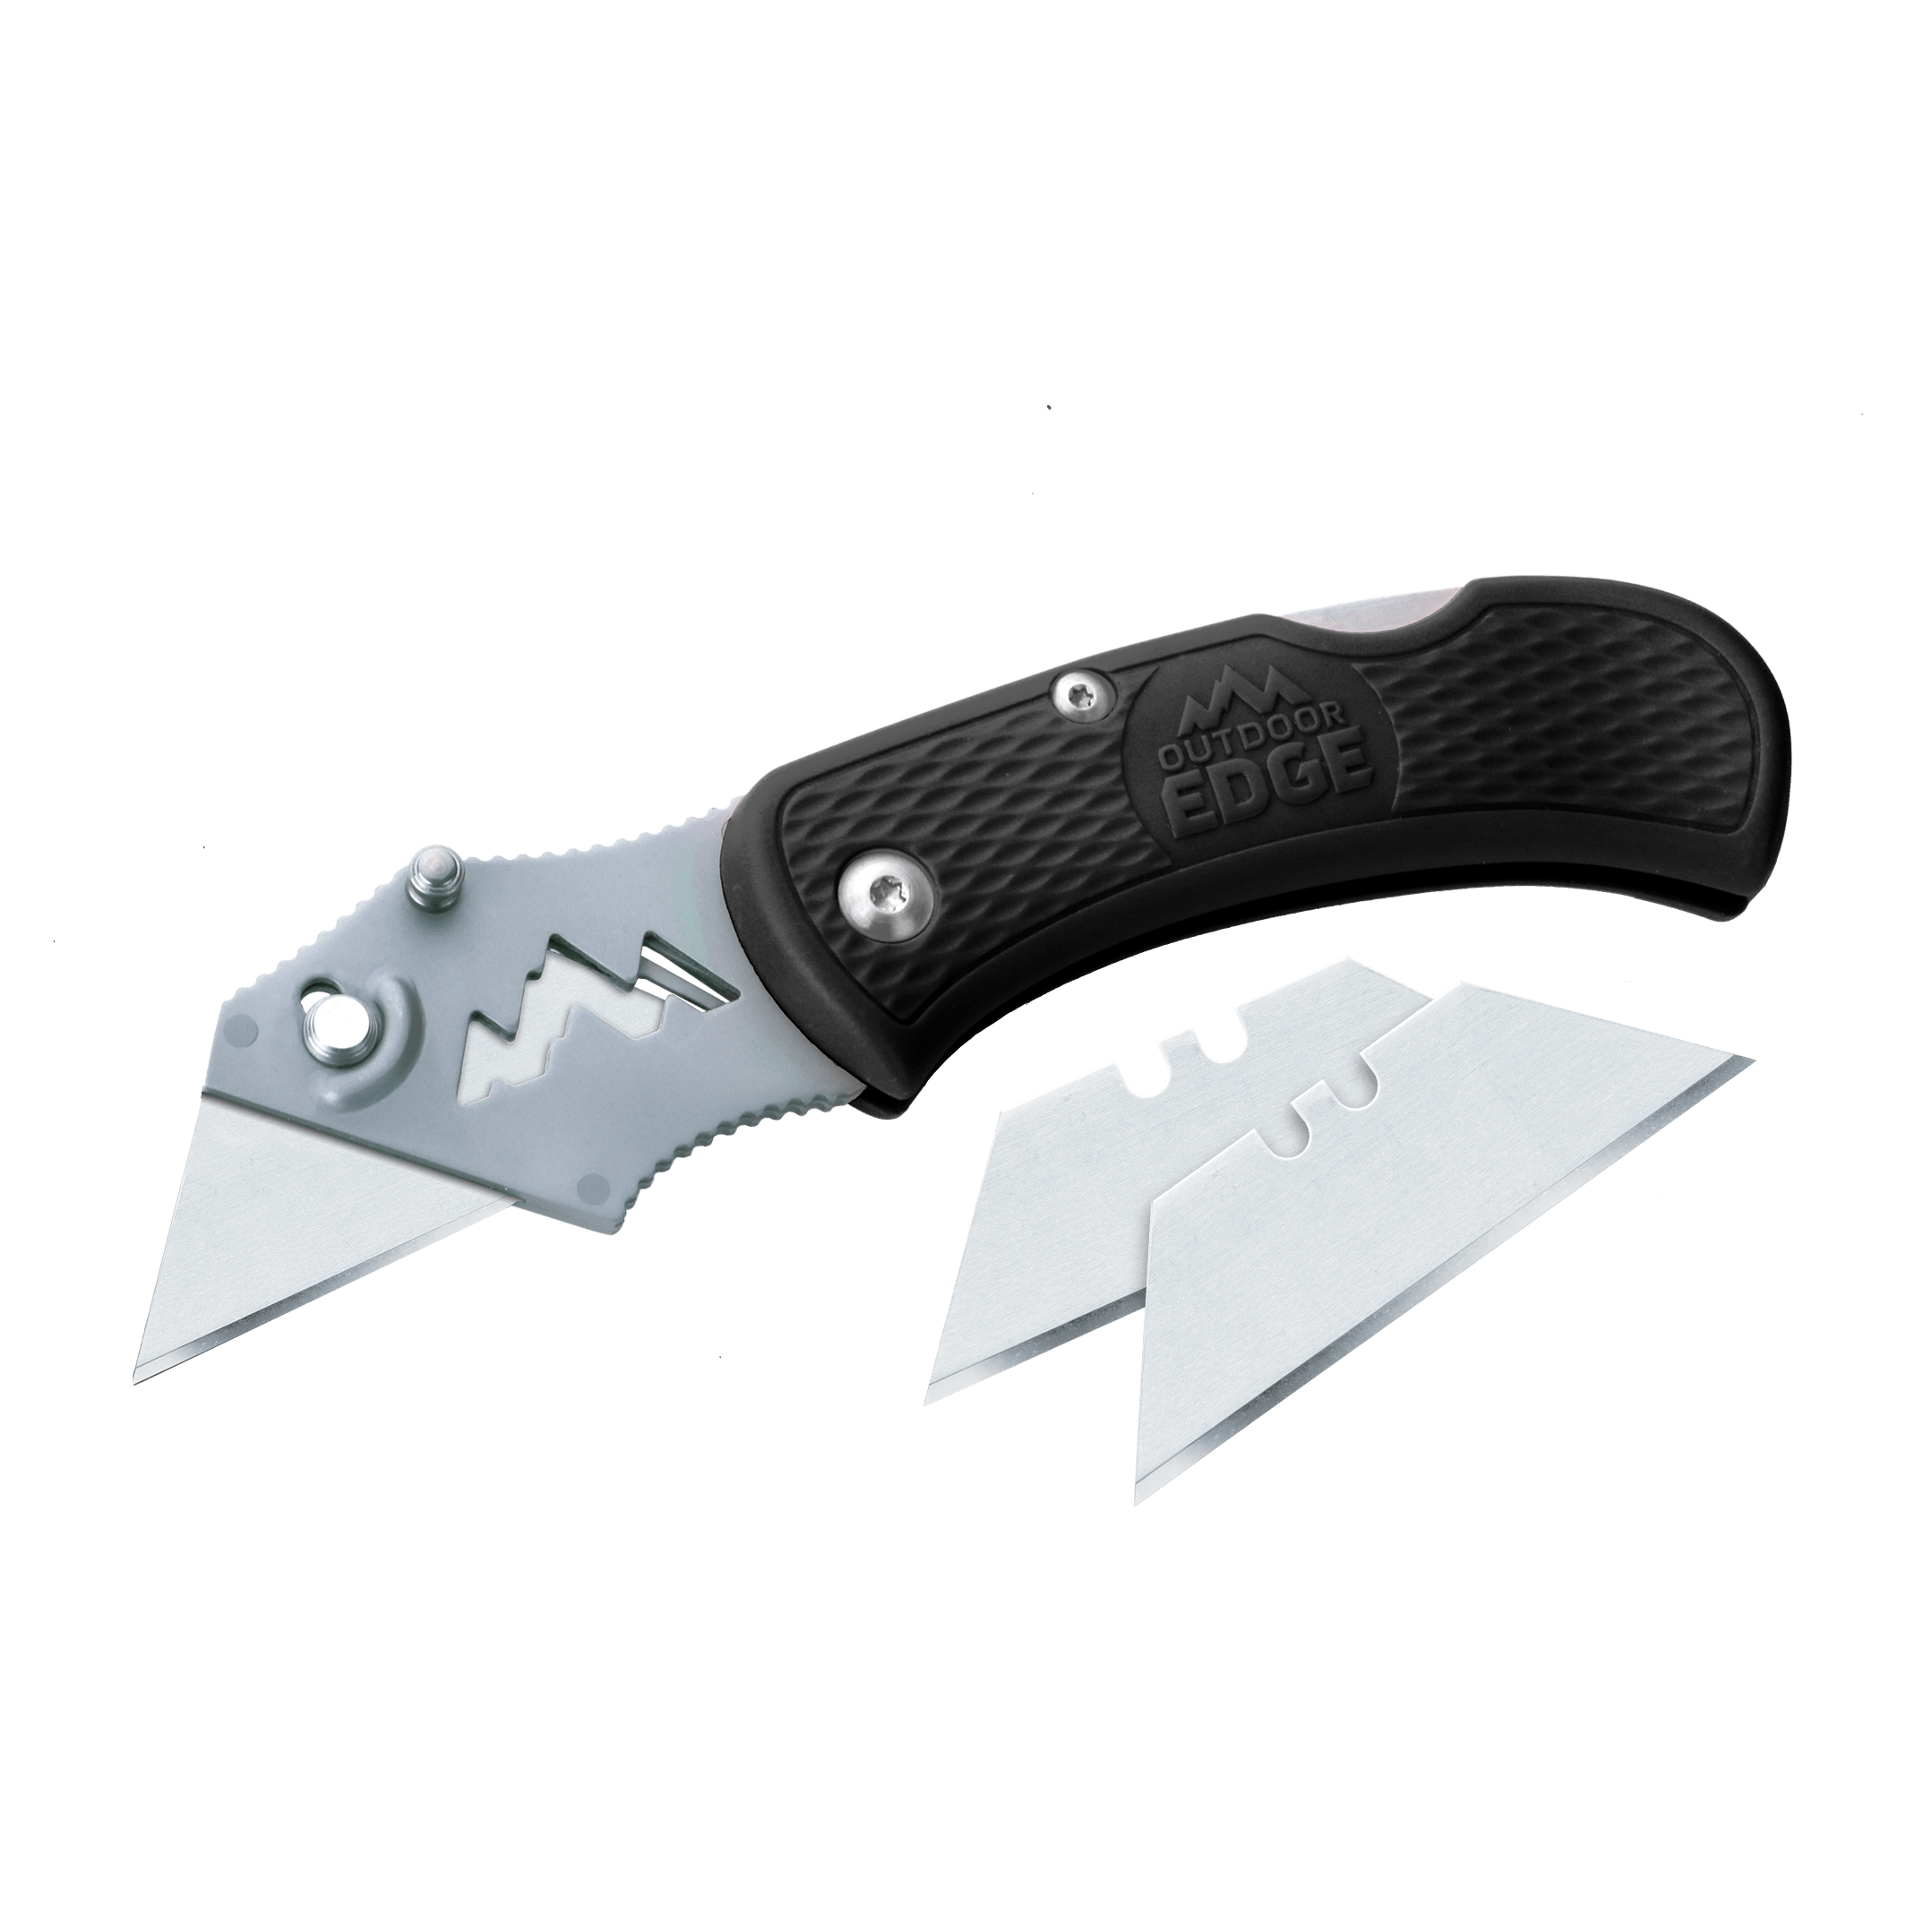 Outdoor Edge Black B.O.A. (Box Opening Assistant) Utility knife product photo